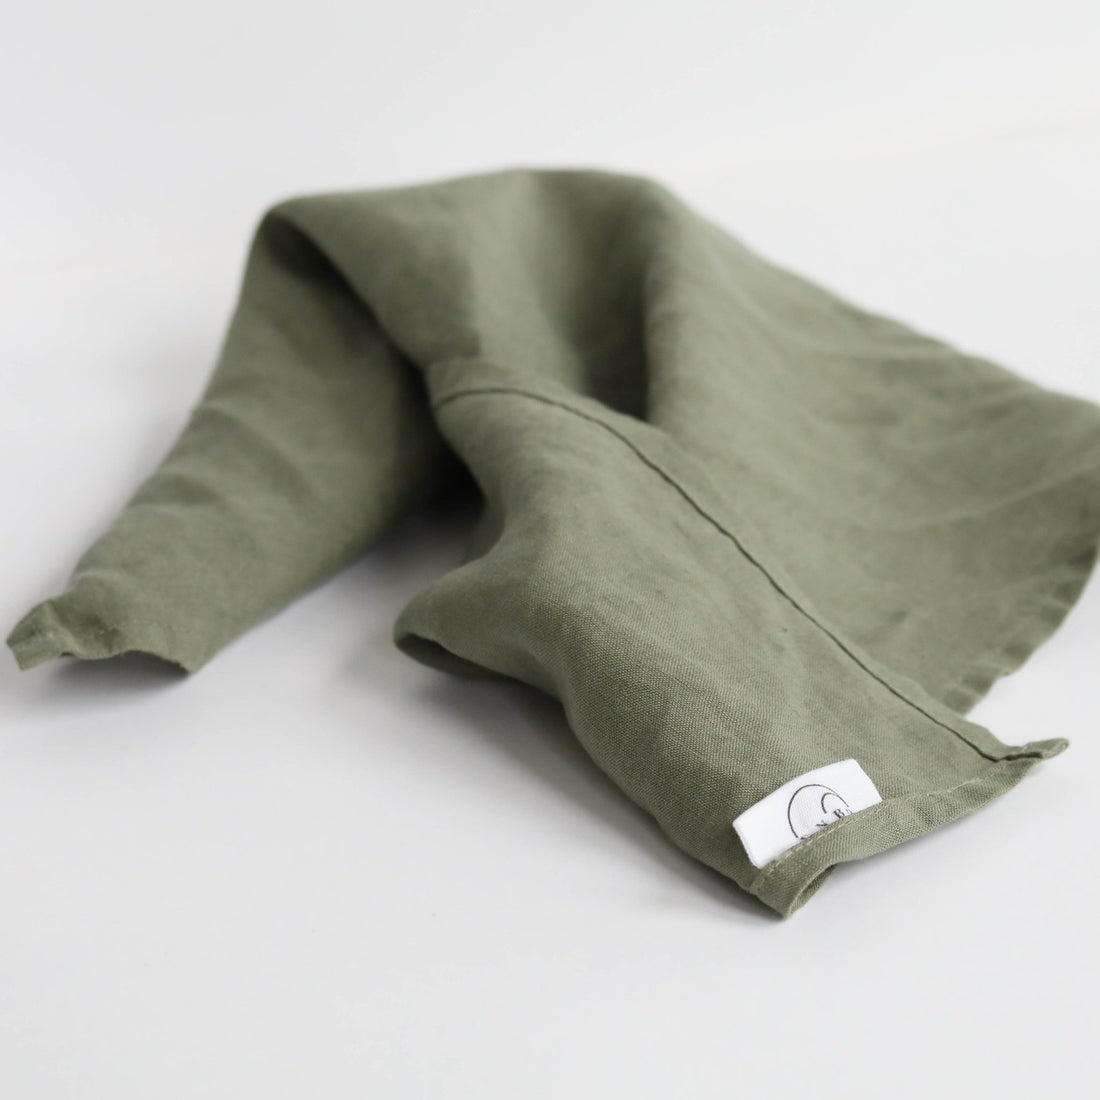 Olea French Linen Napkin Set of 4 - Green and Brass